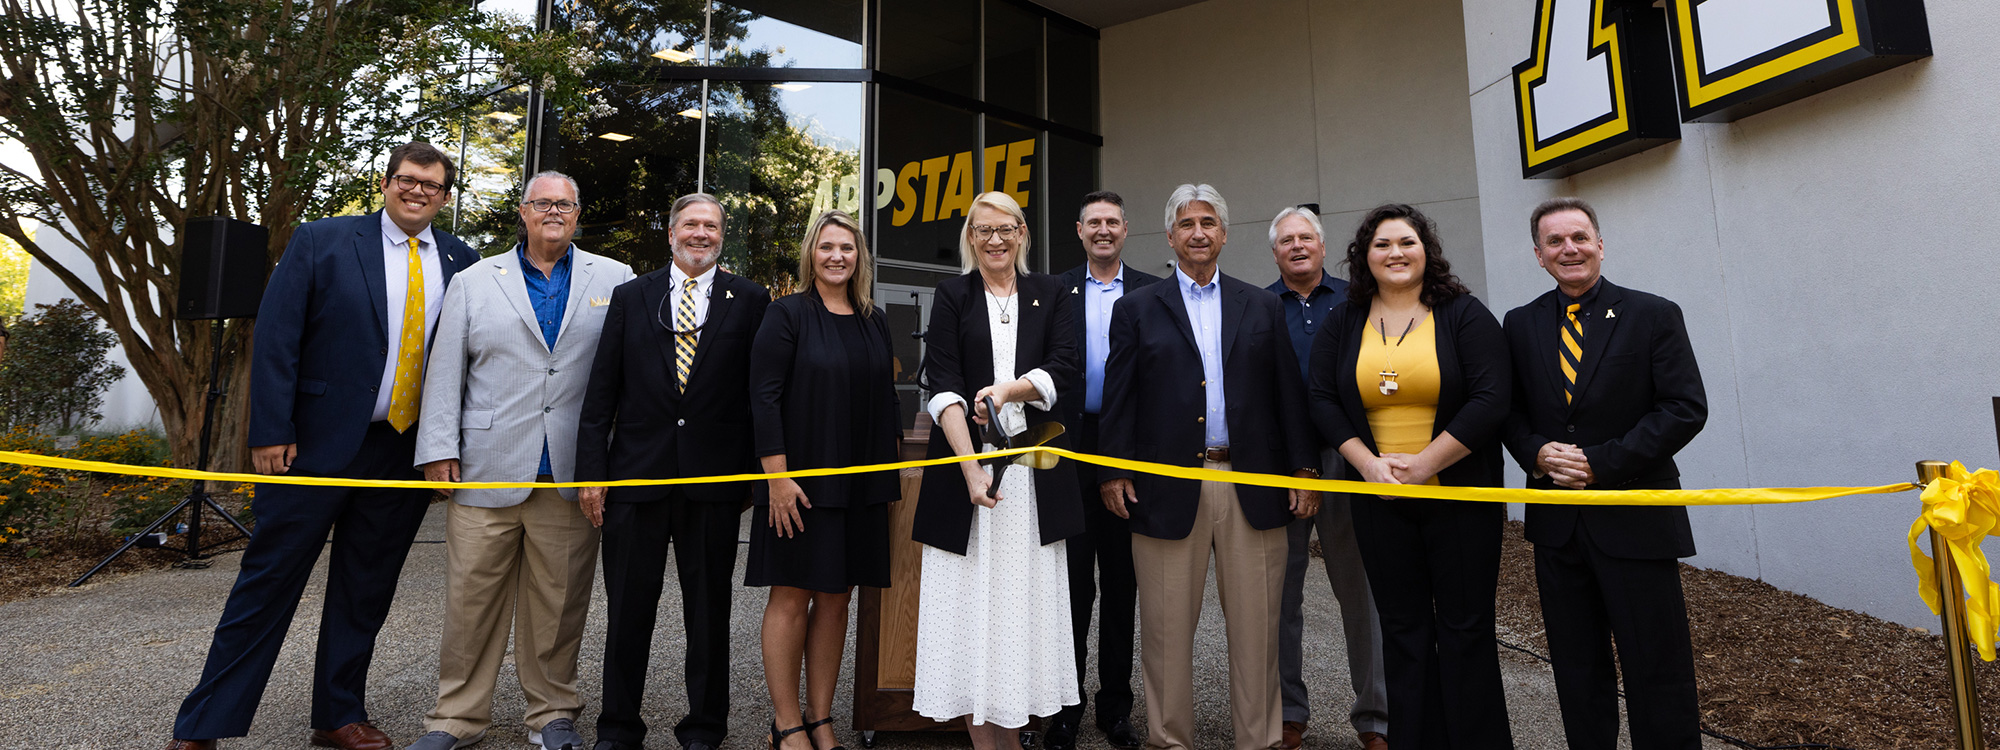 App State opens Hickory campus, expanding educational access in Western North Carolina